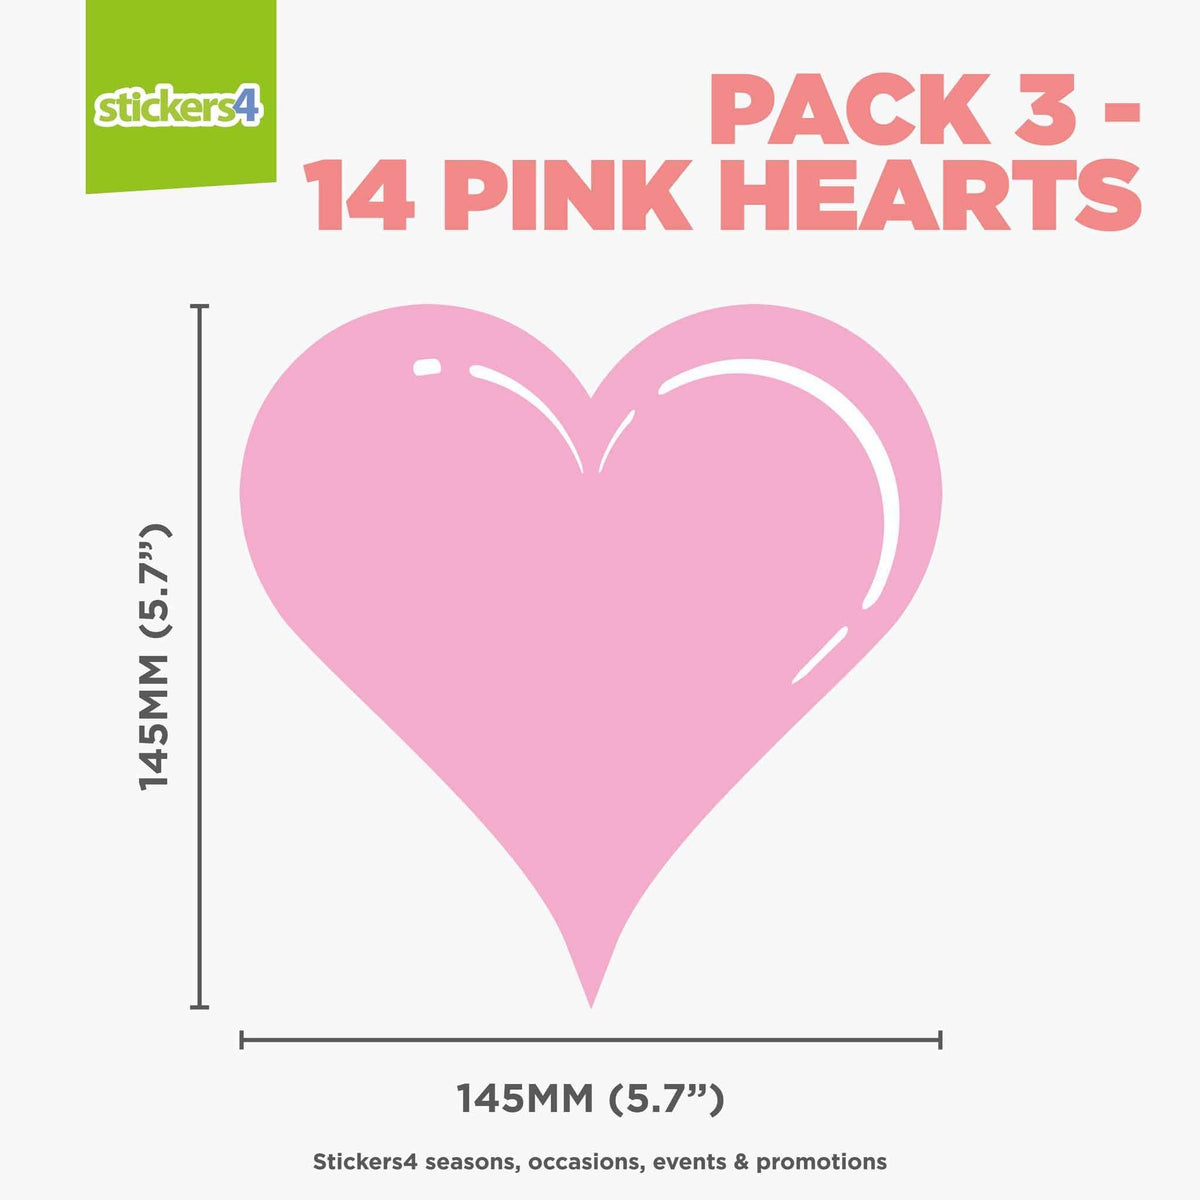 Static Cling Hearts: Pack 3 (14 Hearts @ 145mm)